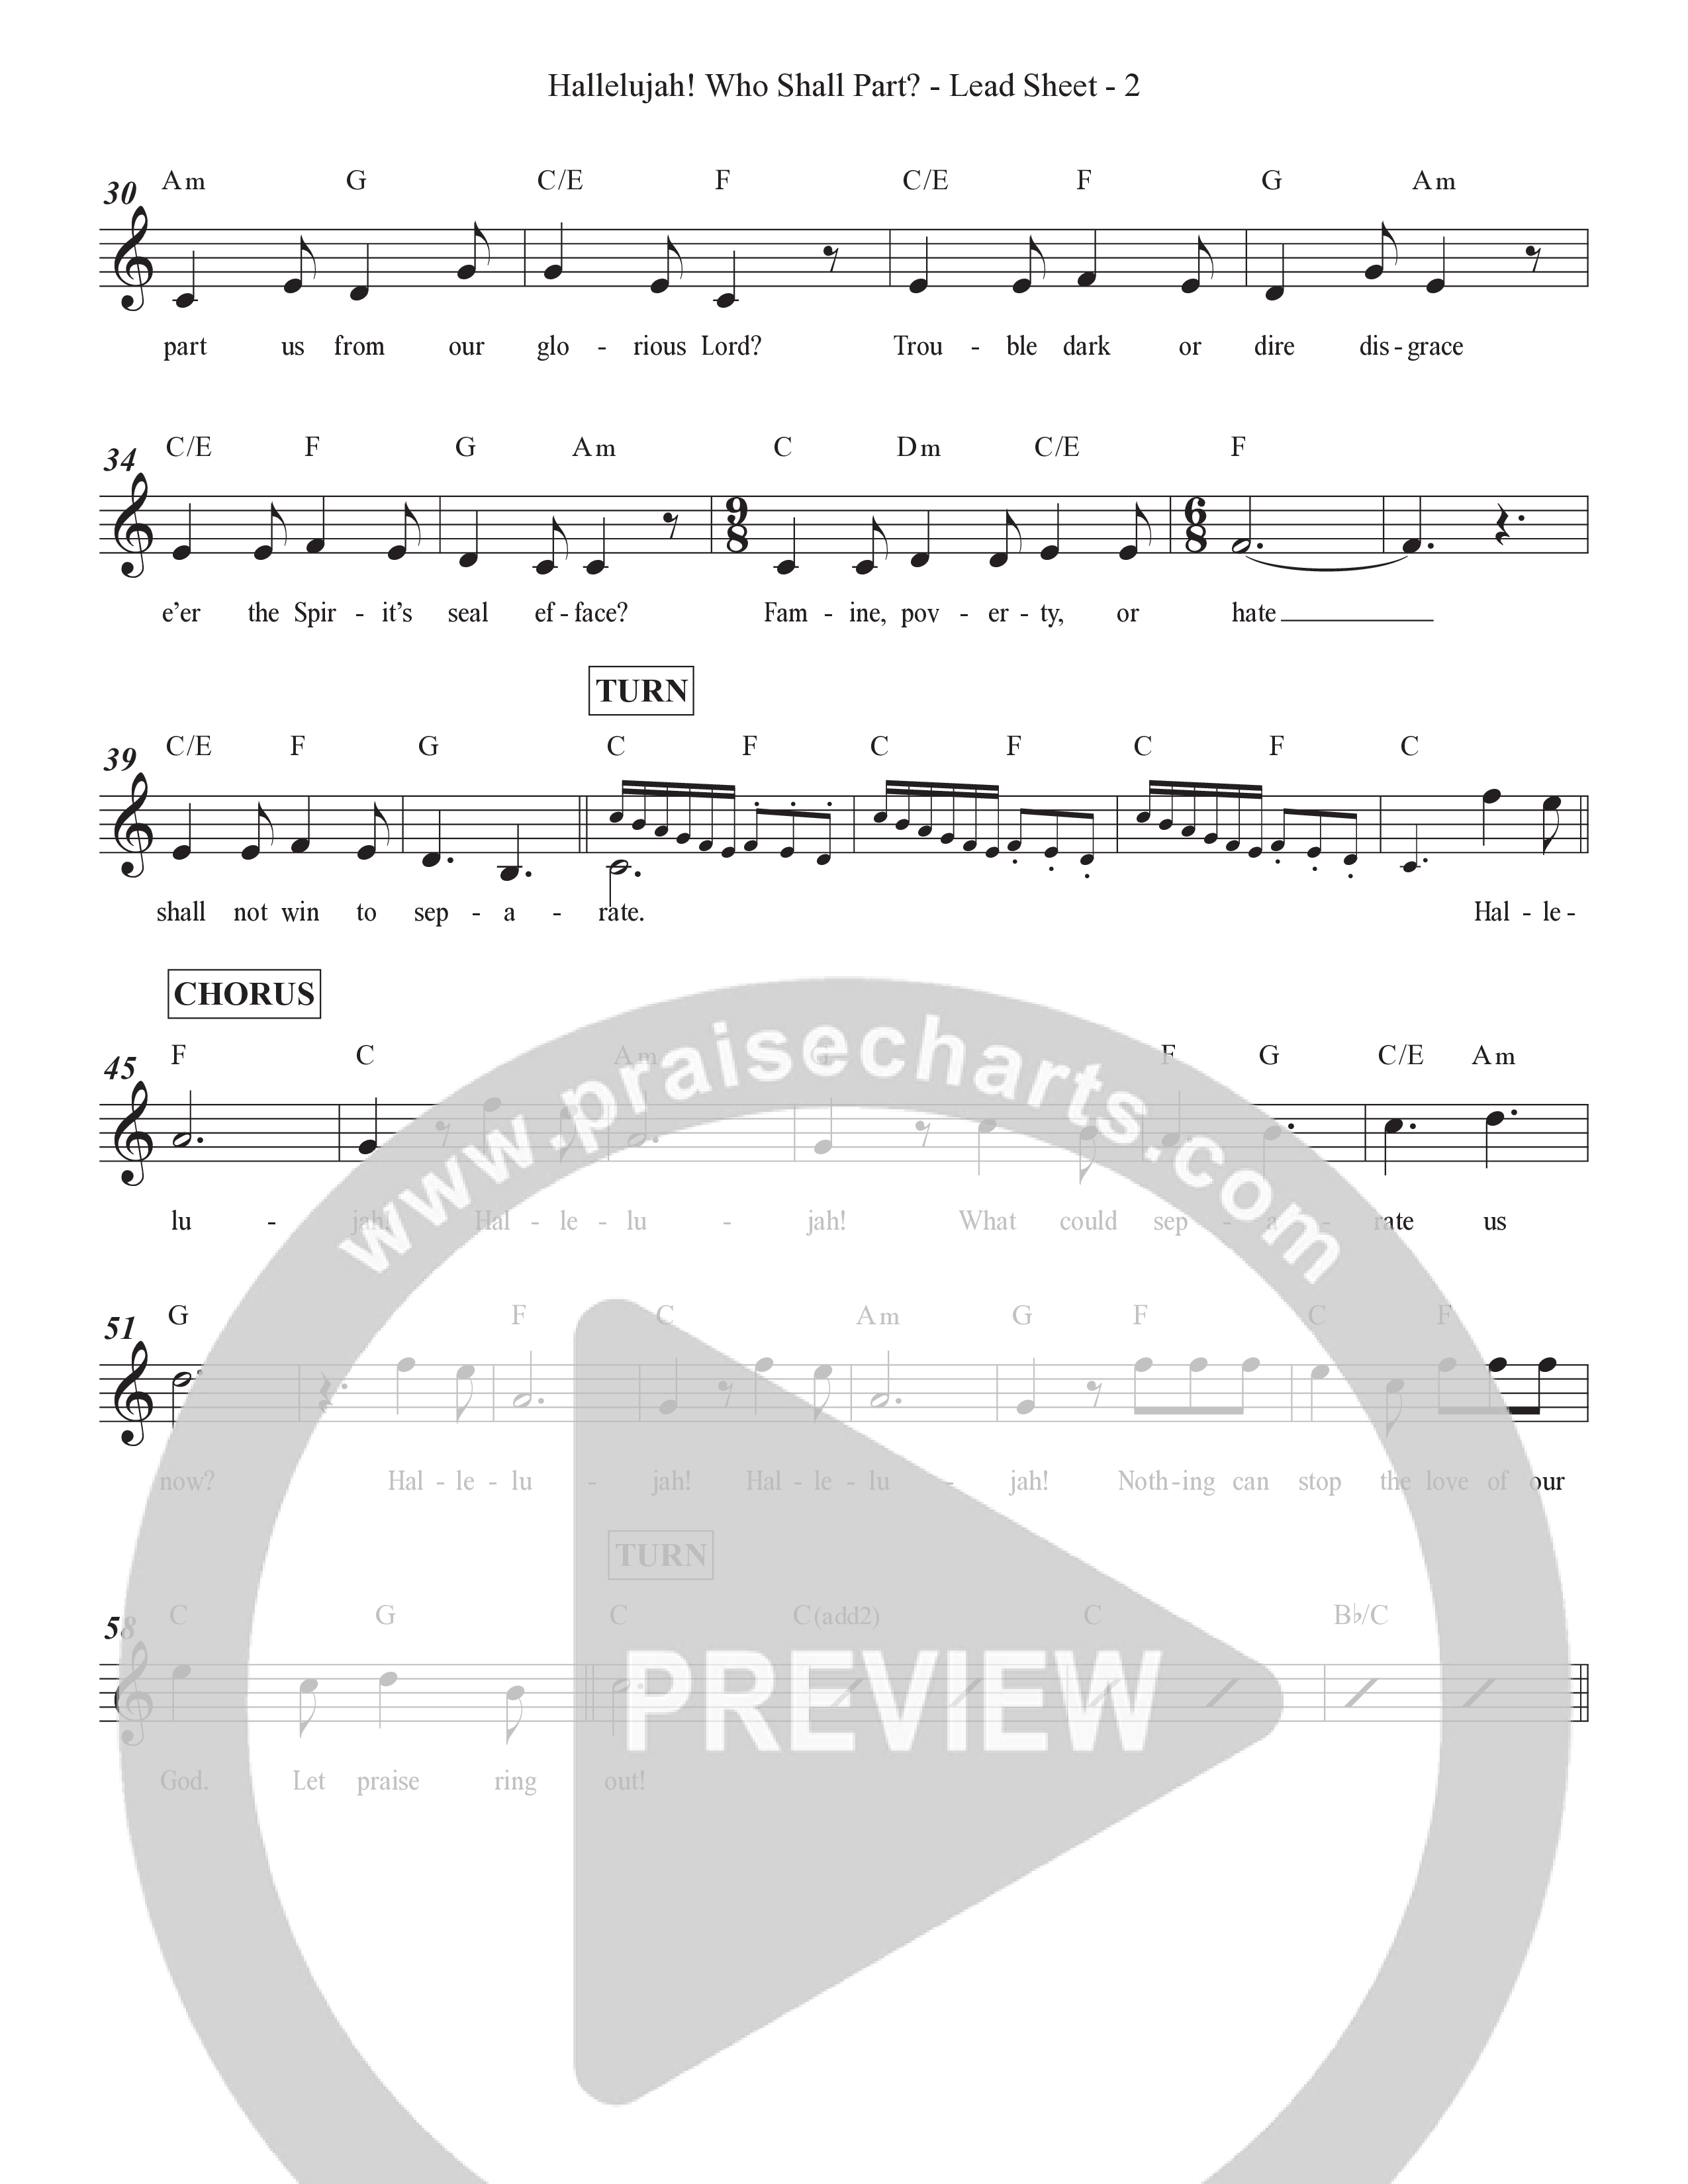 Hallelujah Who Shall Part Lead Sheet Melody (Grace Worship)